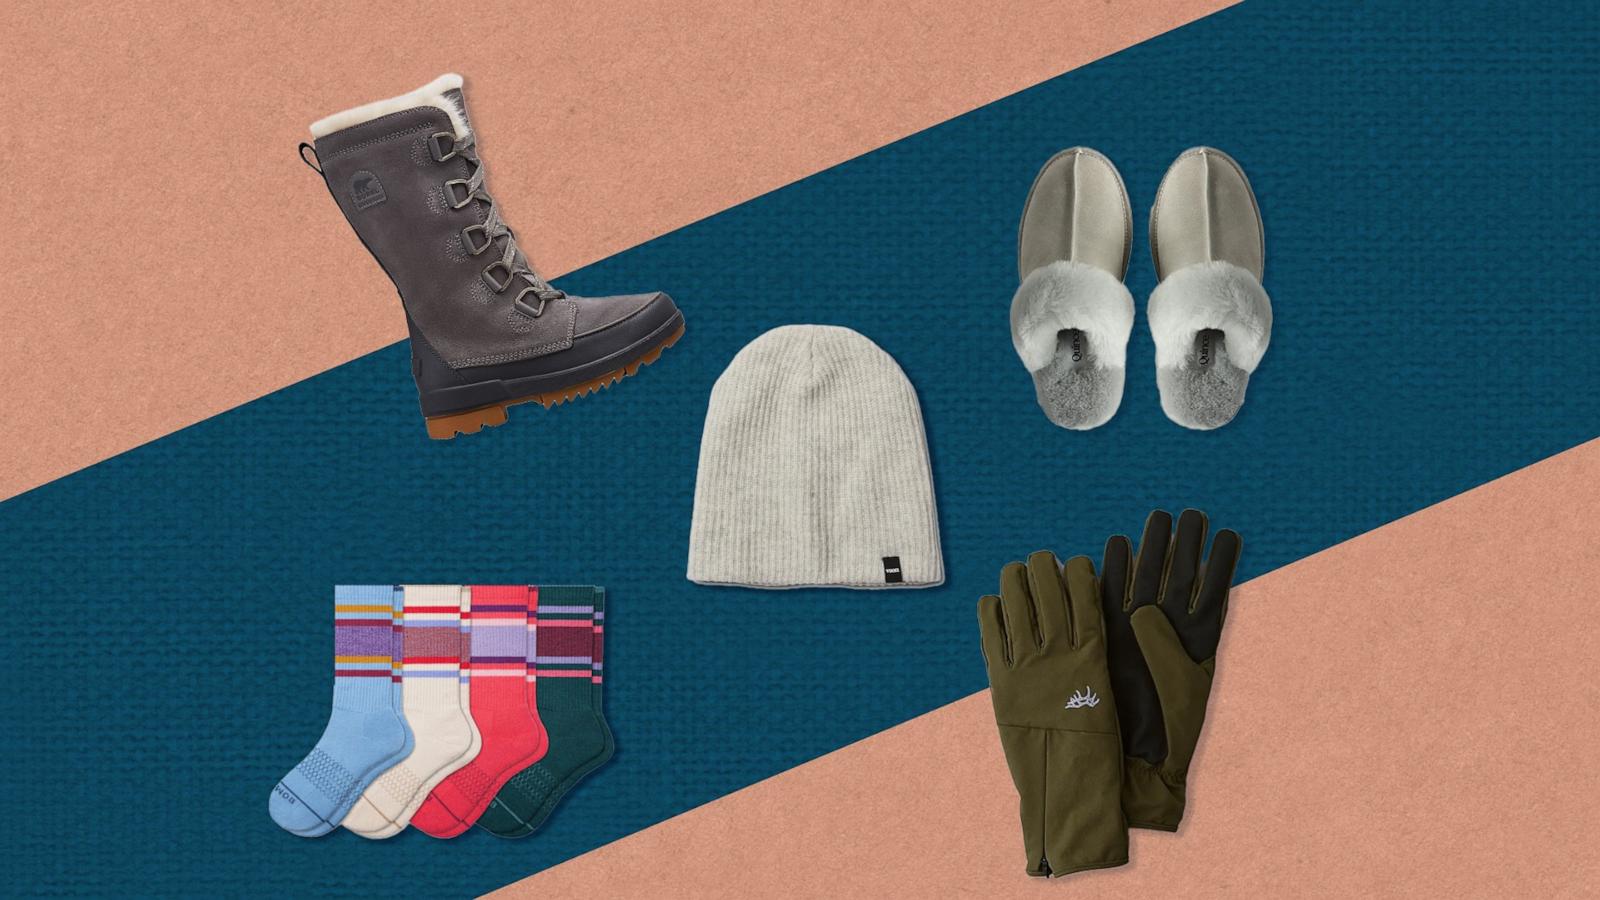 19 Winter Accessories to Keep You Warm and Stylish in the Cold